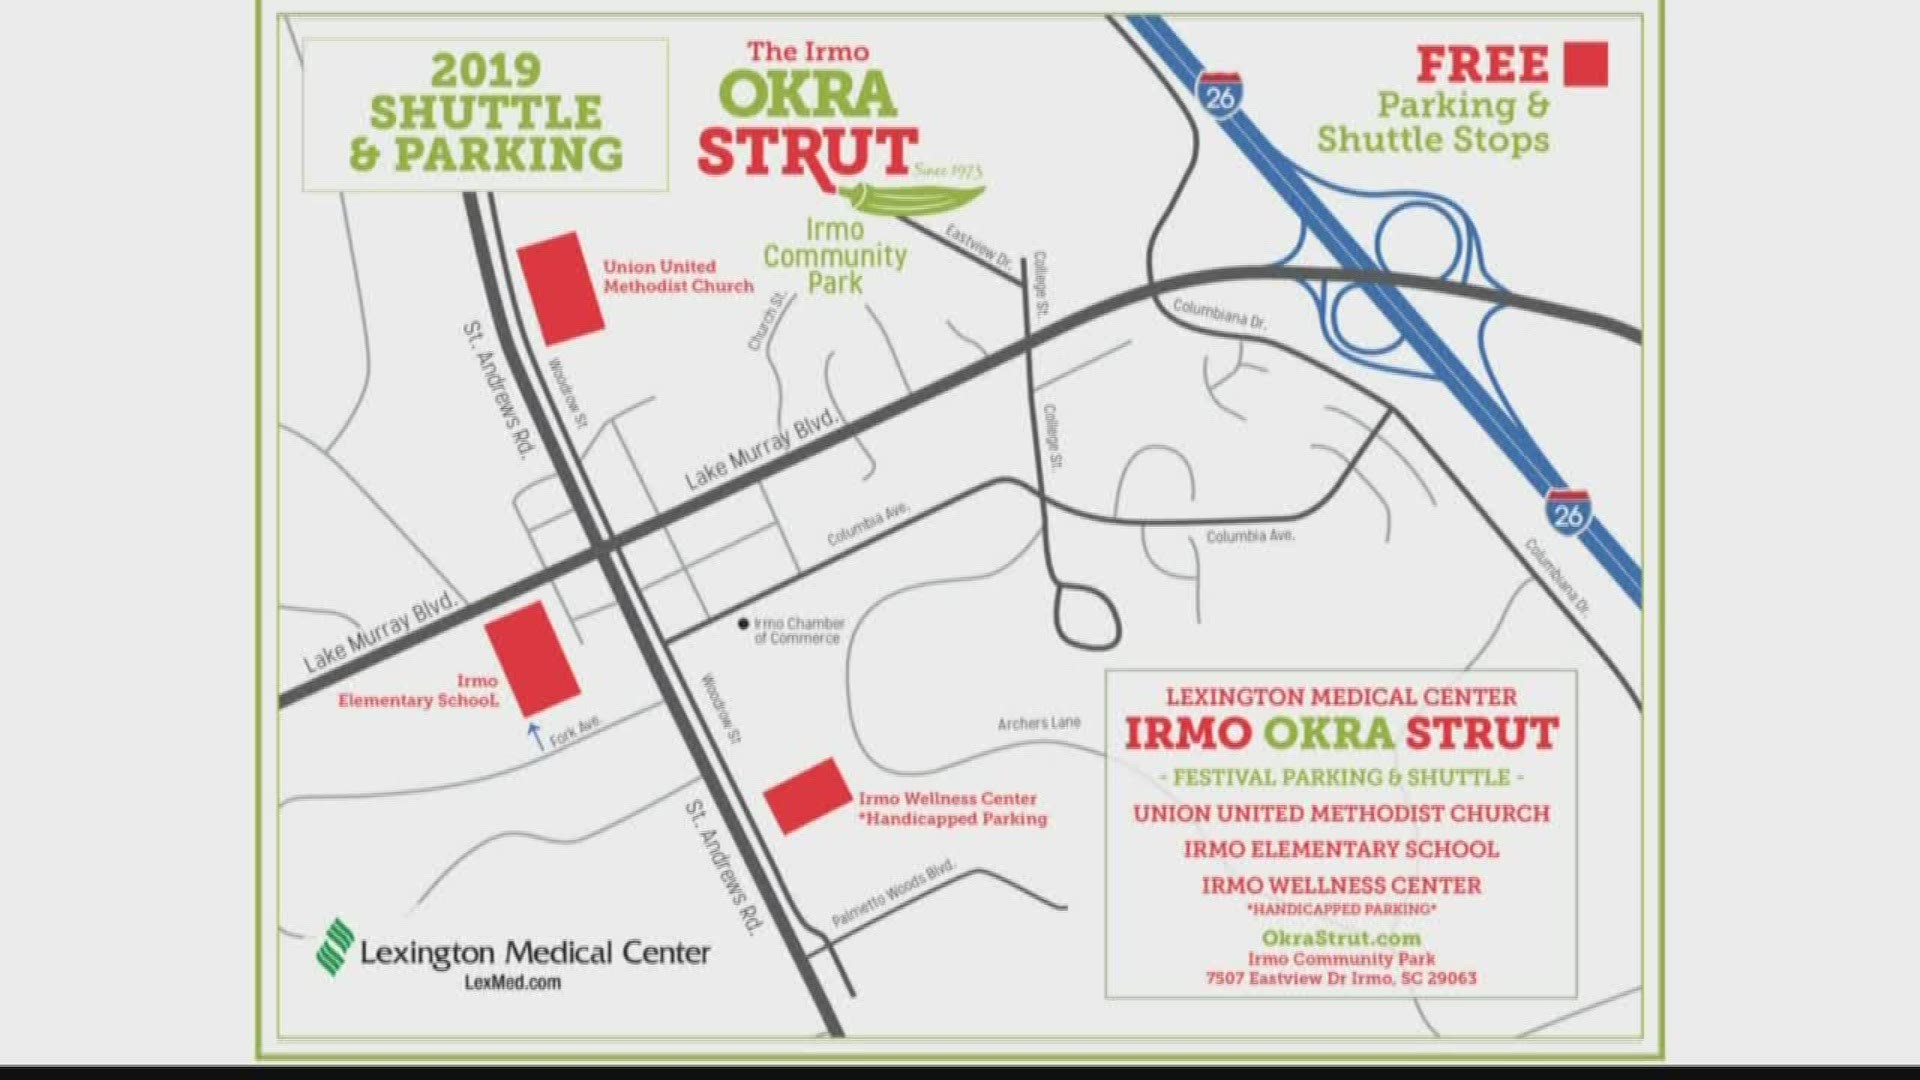 The famous Okra Strut Festival is happening this weekend in Irmo